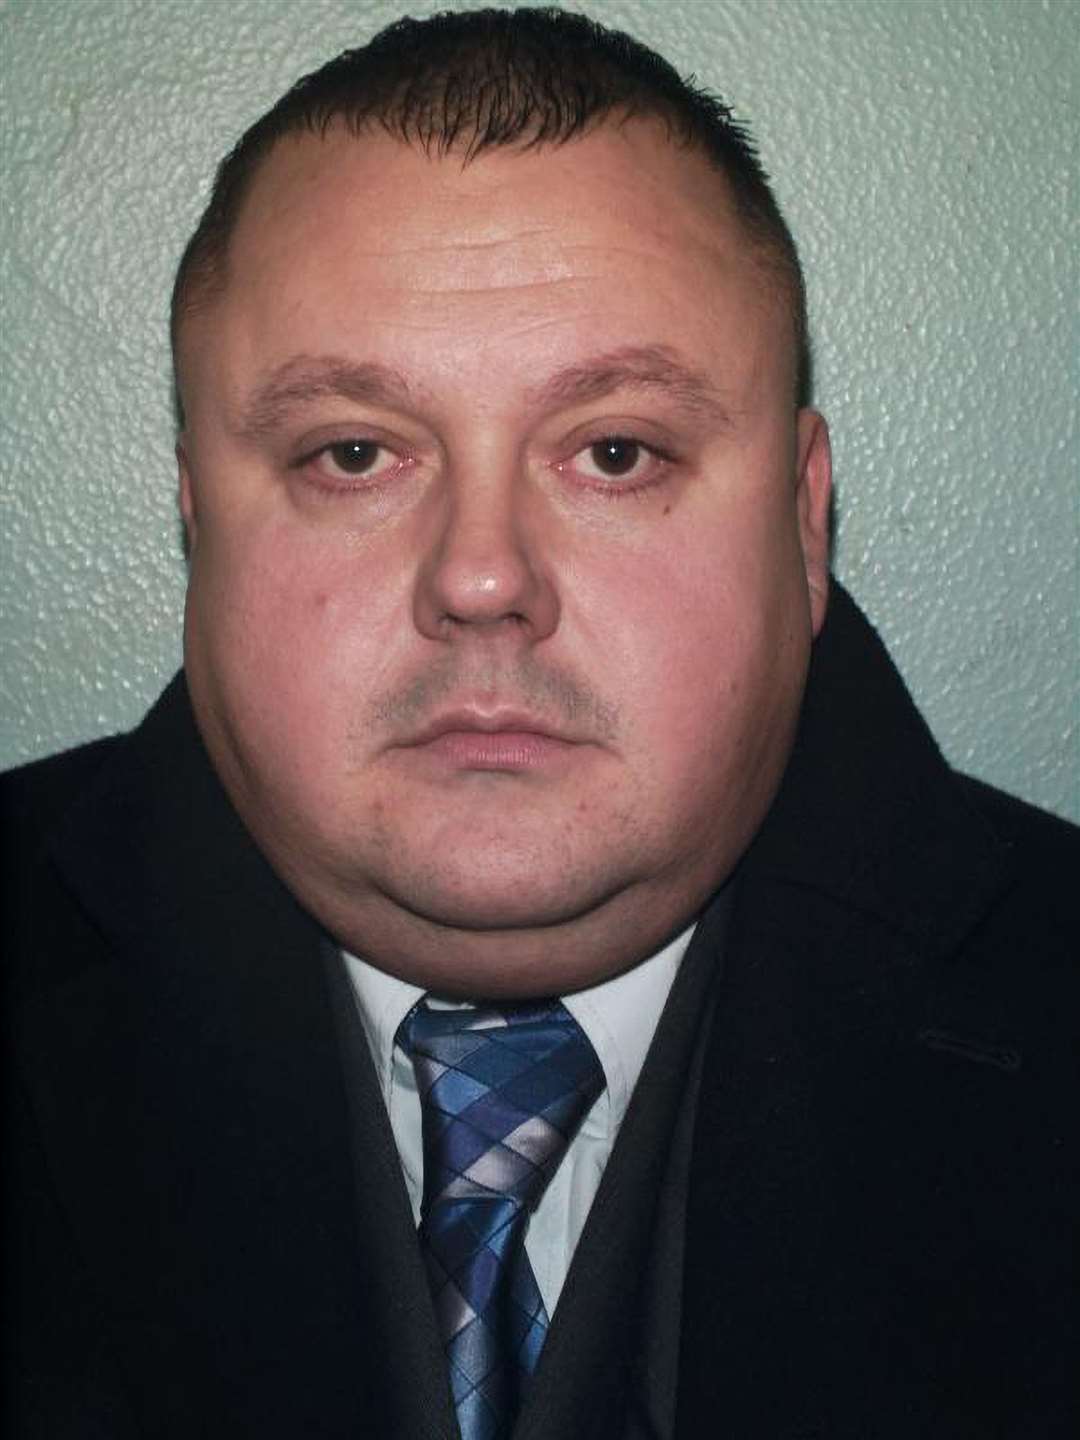 Levi Bellfield claimed responsibility for the killings in a statement